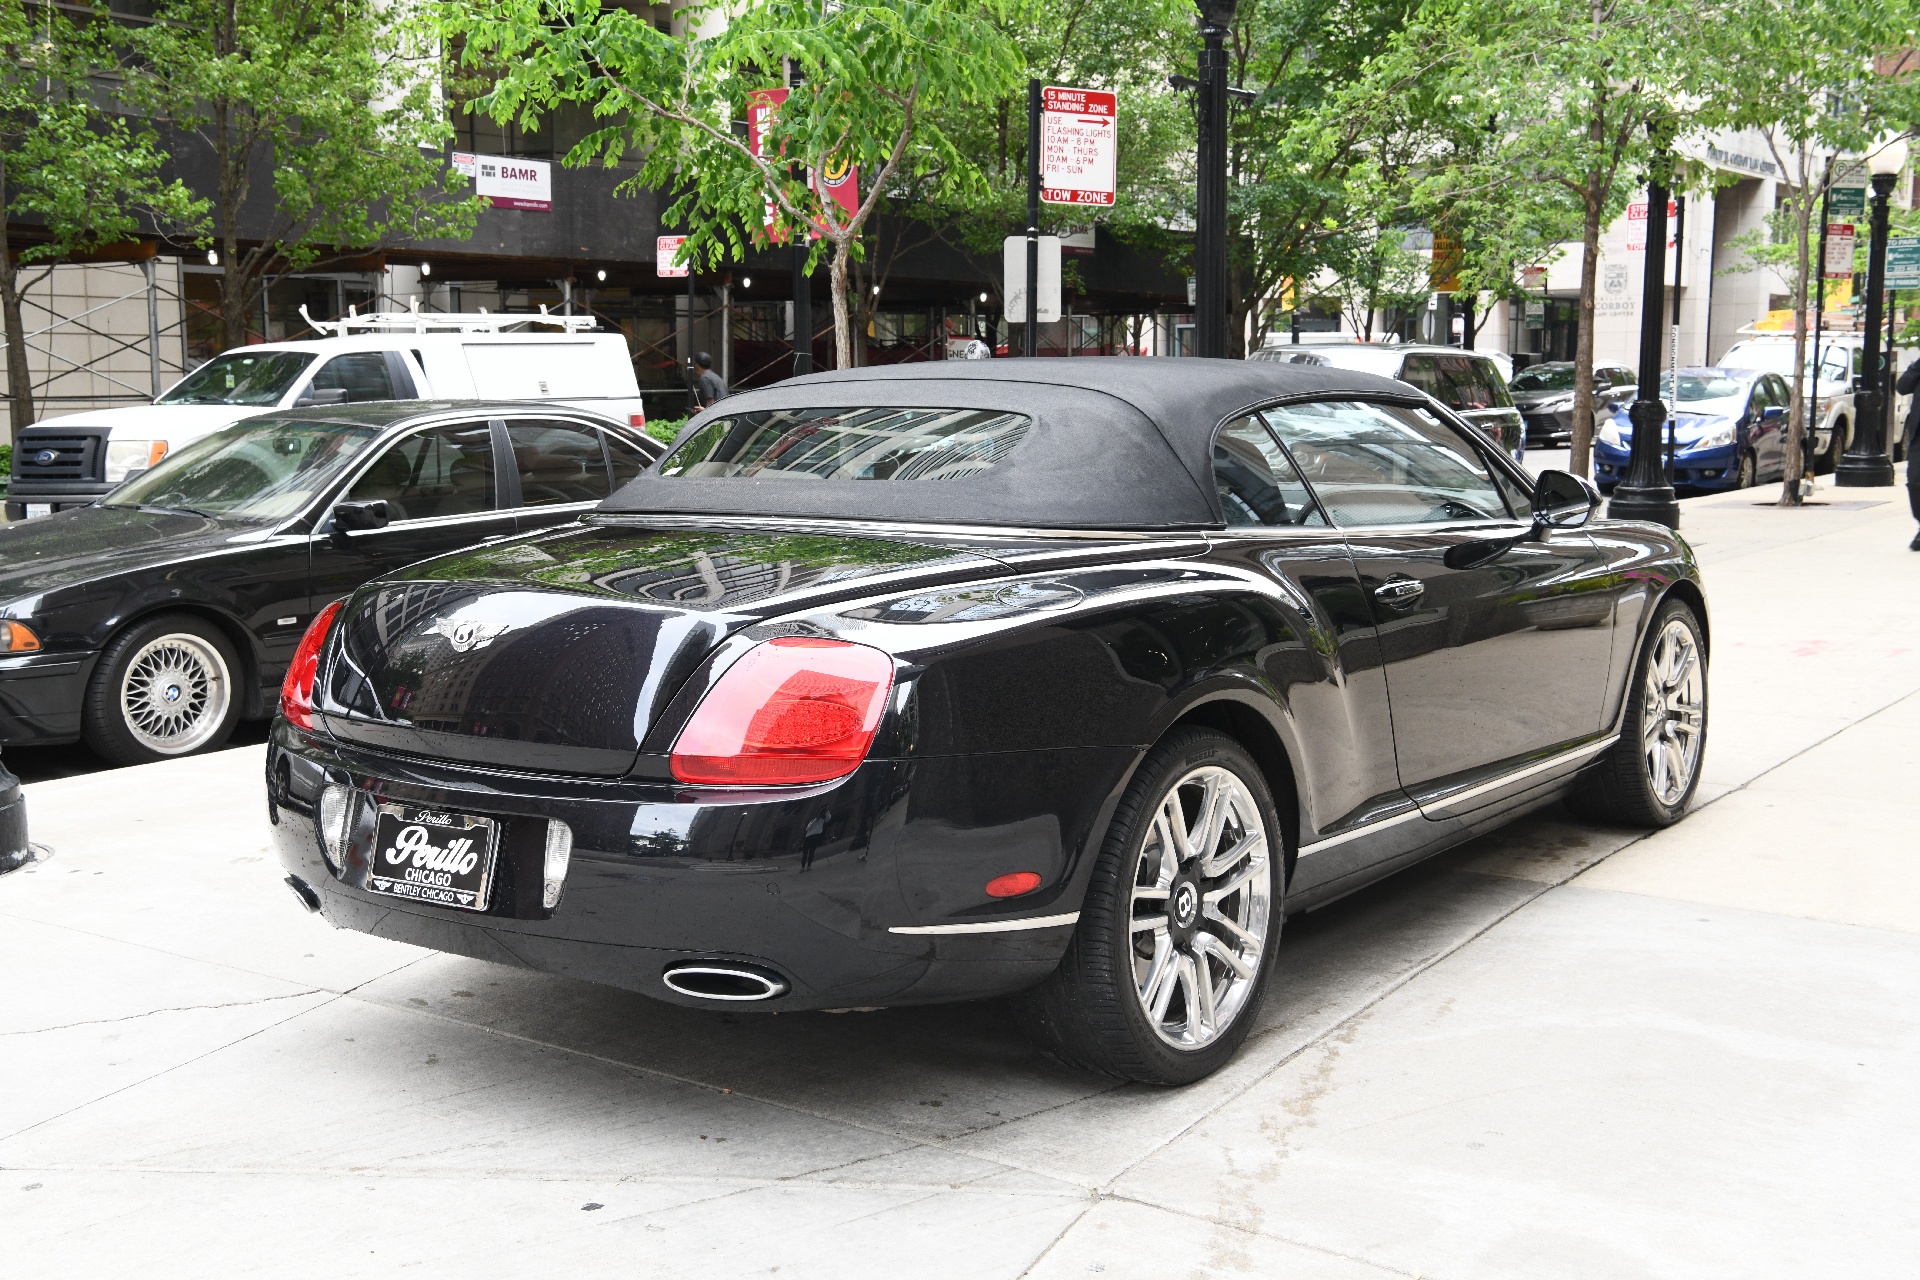 Used 2011 Bentley continental GTC Convertible GTC Convertible | Chicago, IL